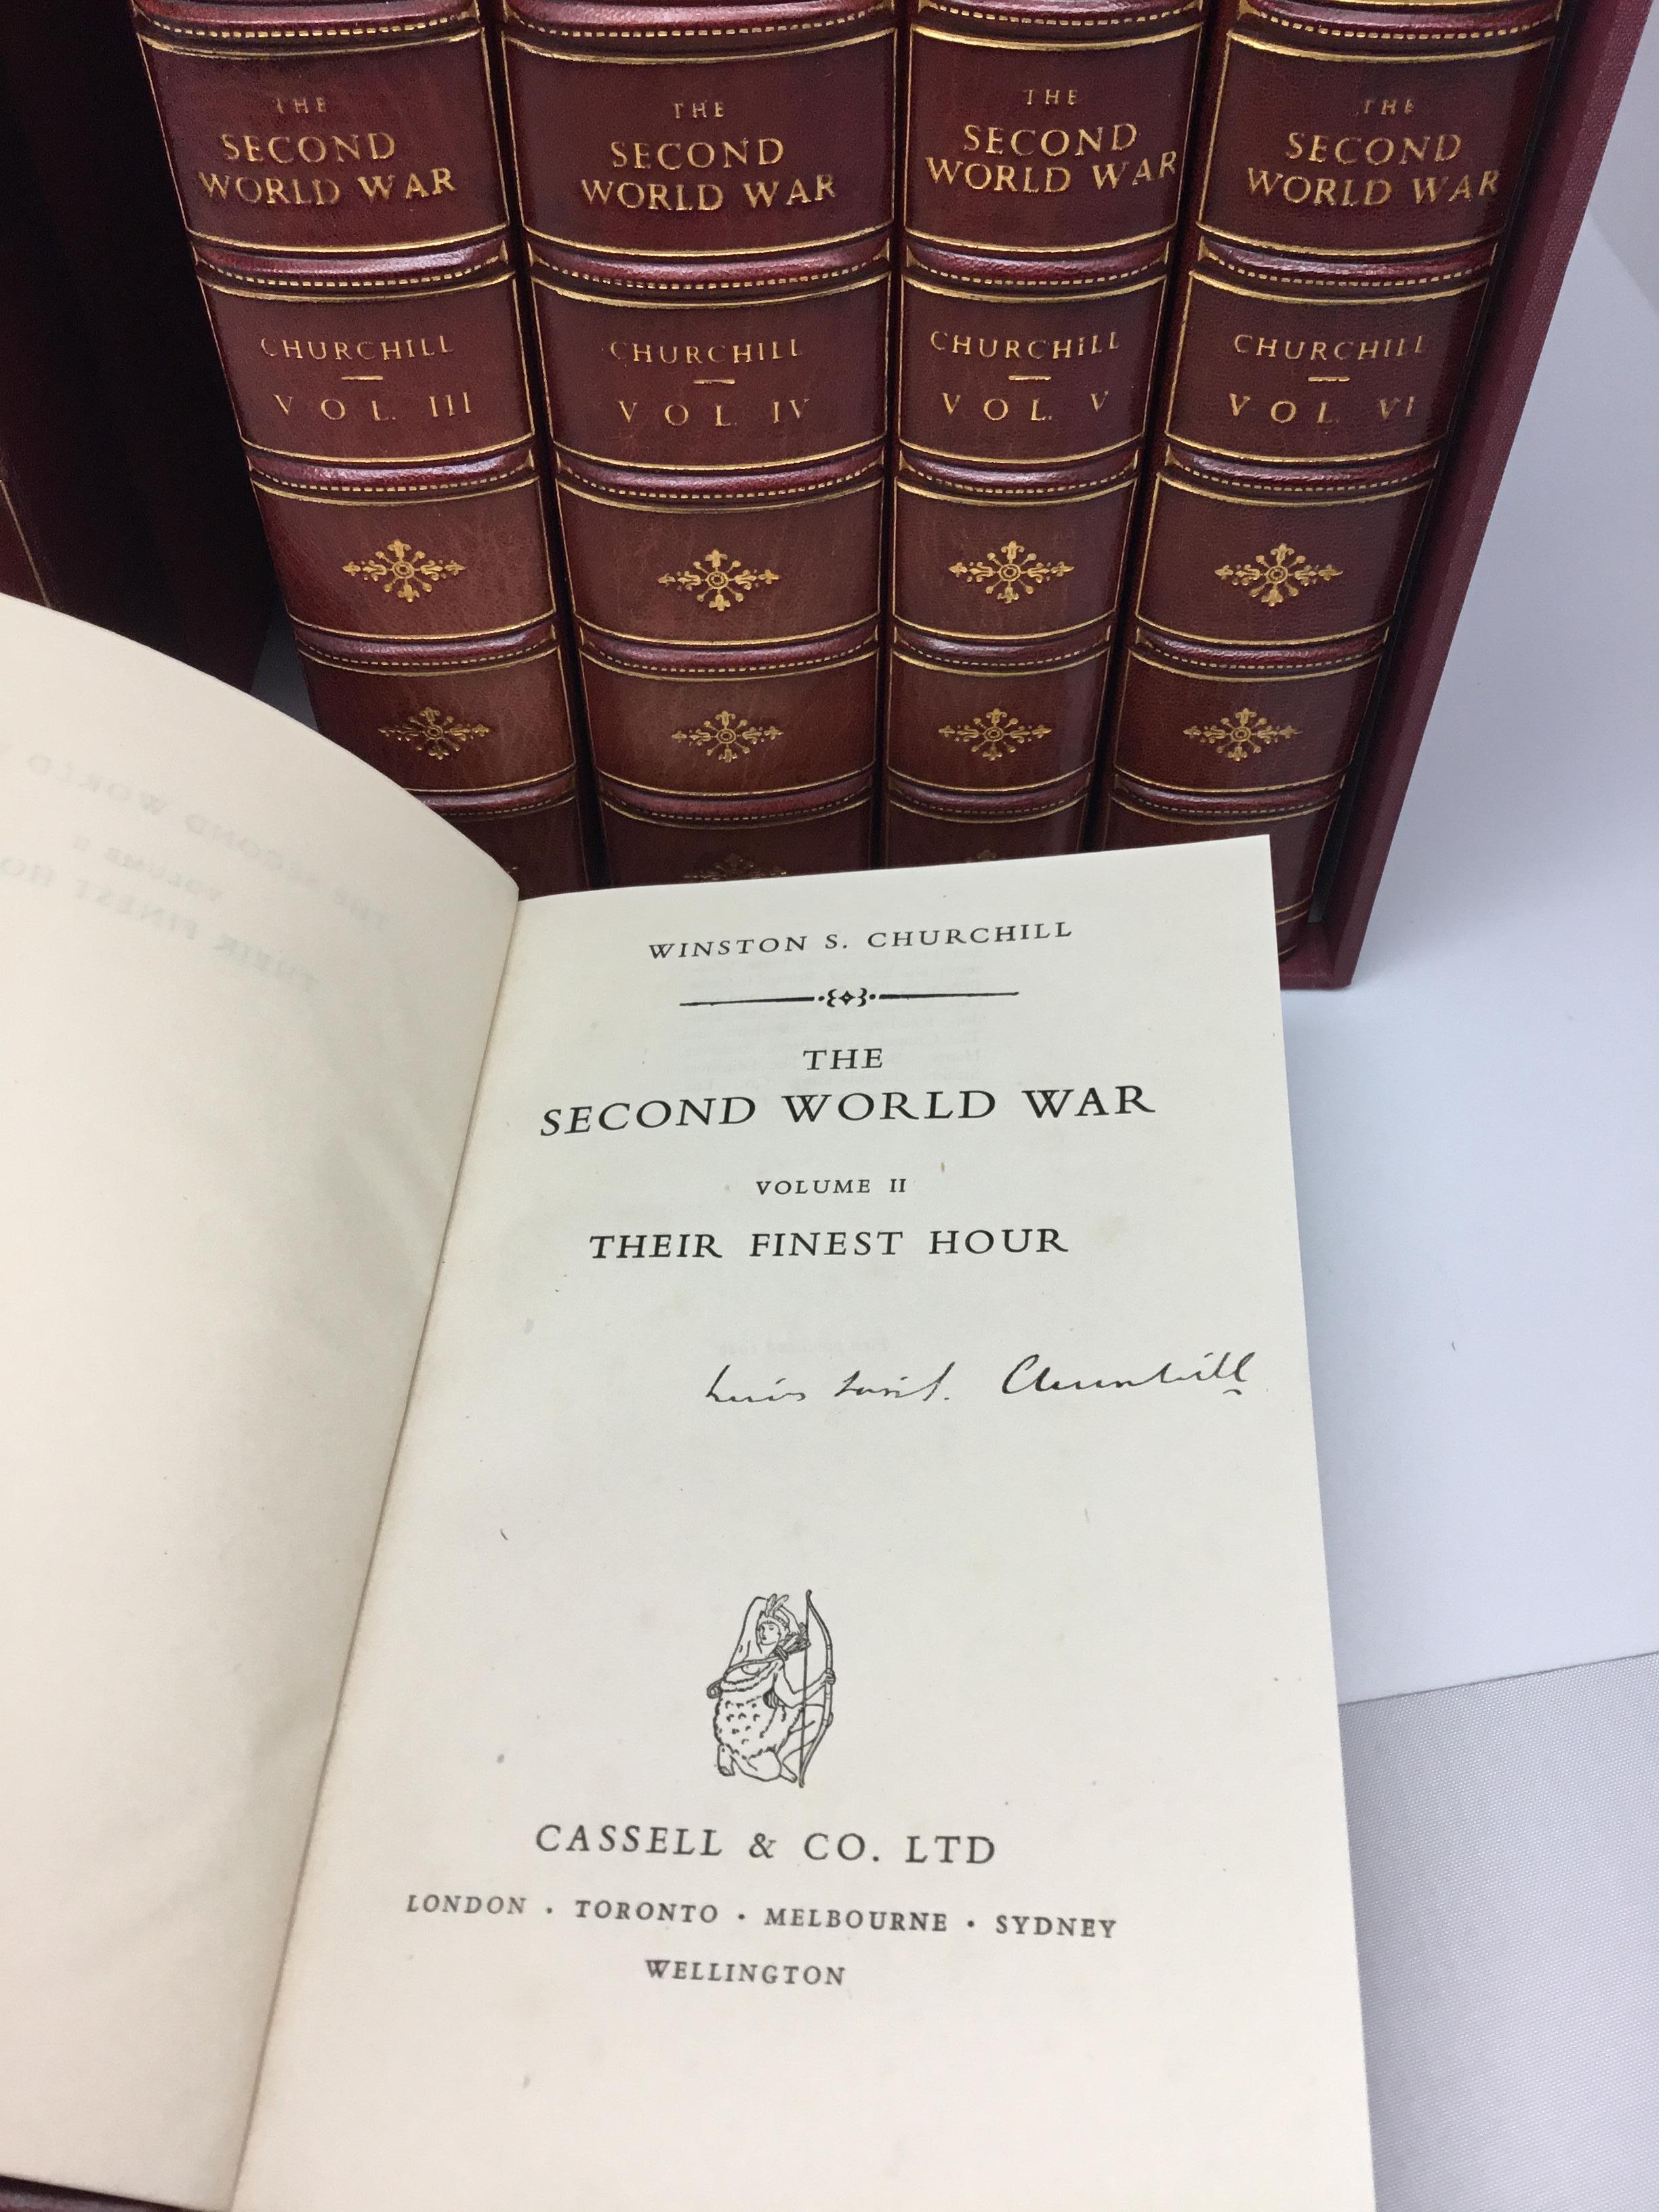 This is a first edition, set of six volumes, of Winston S. Churchill's definitive history of the Second World War. Published and finely bound between 1948 and 1954 -- all true British first editions. 

“The Second World War” is a definitive